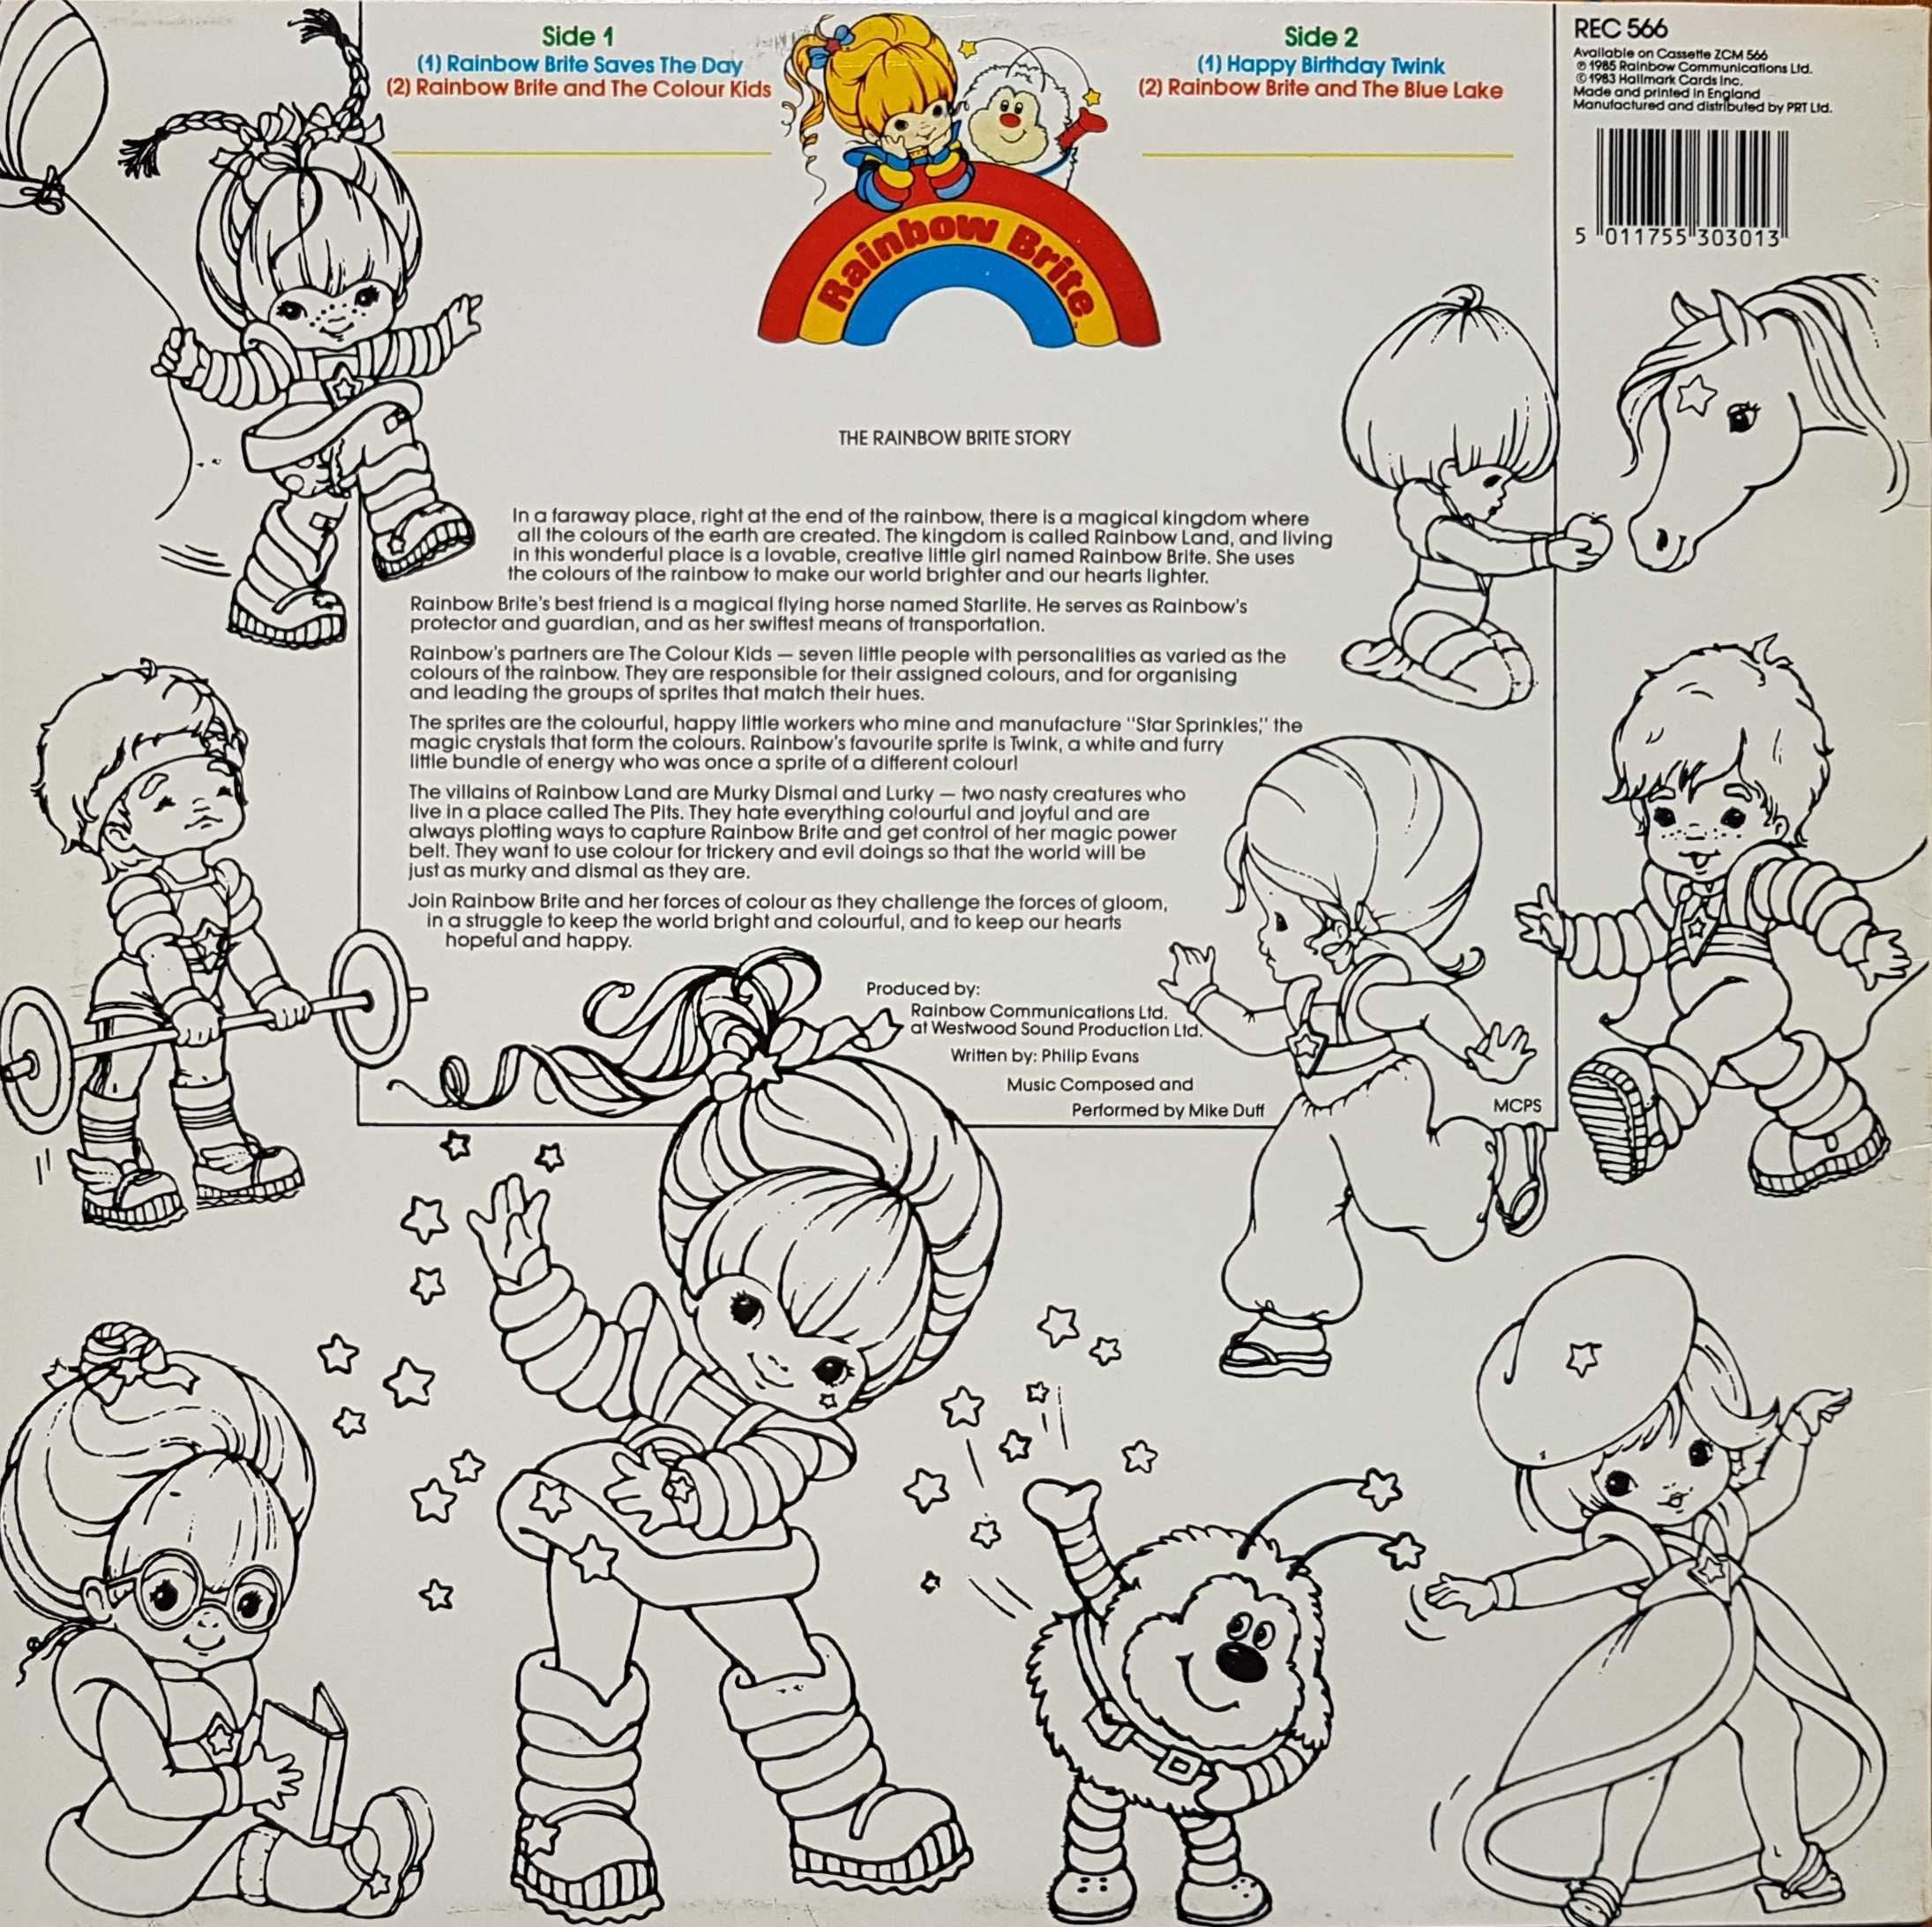 Picture of REC 566 Rainbow bright by artist Philip Evans from the BBC records and Tapes library